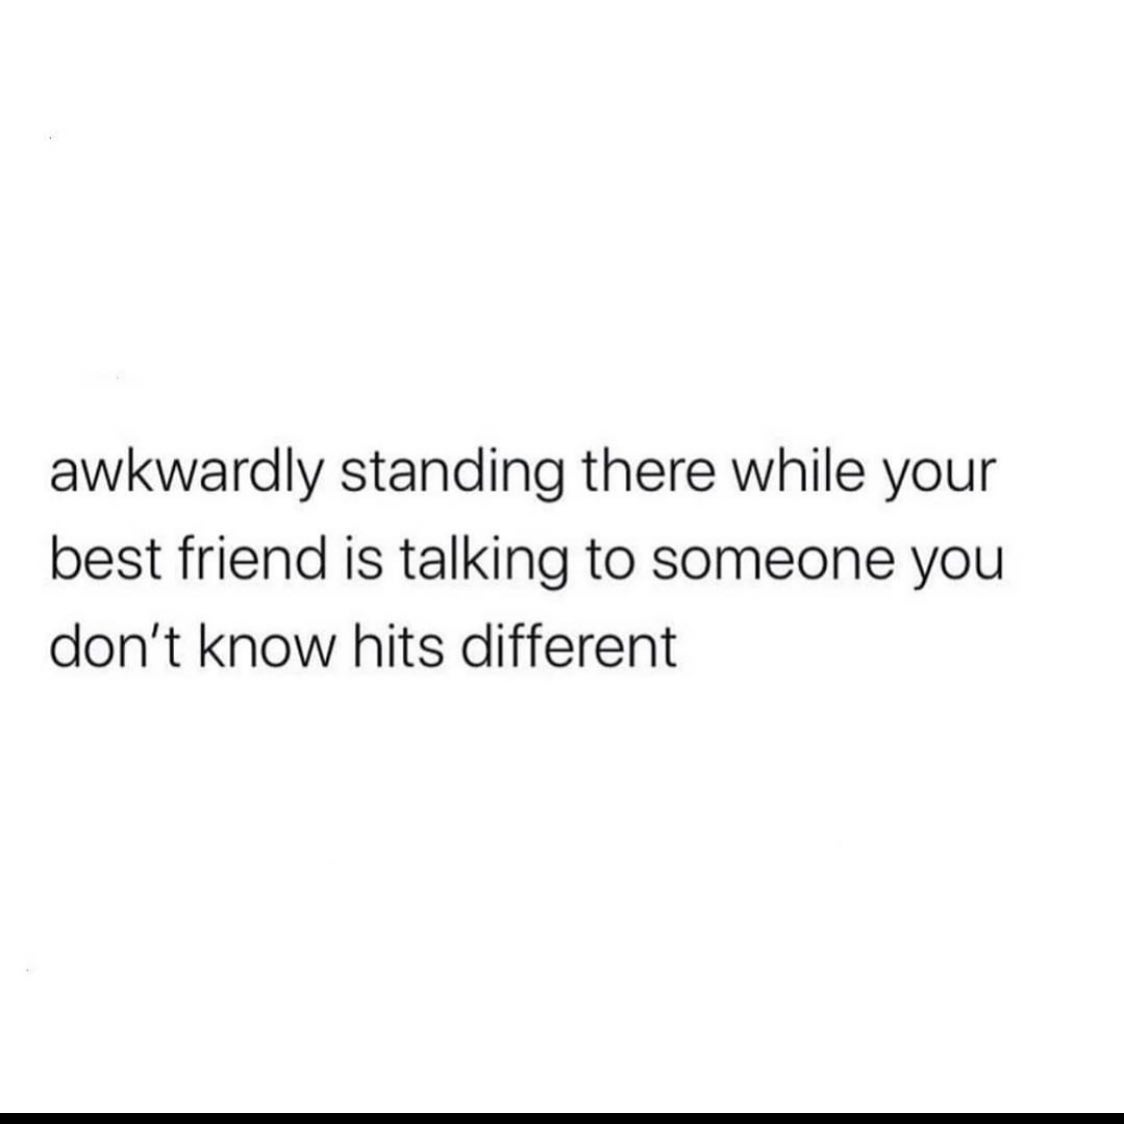 relatable memes - gallows humor memes - awkwardly standing there while your best friend is talking to someone you don't know hits different